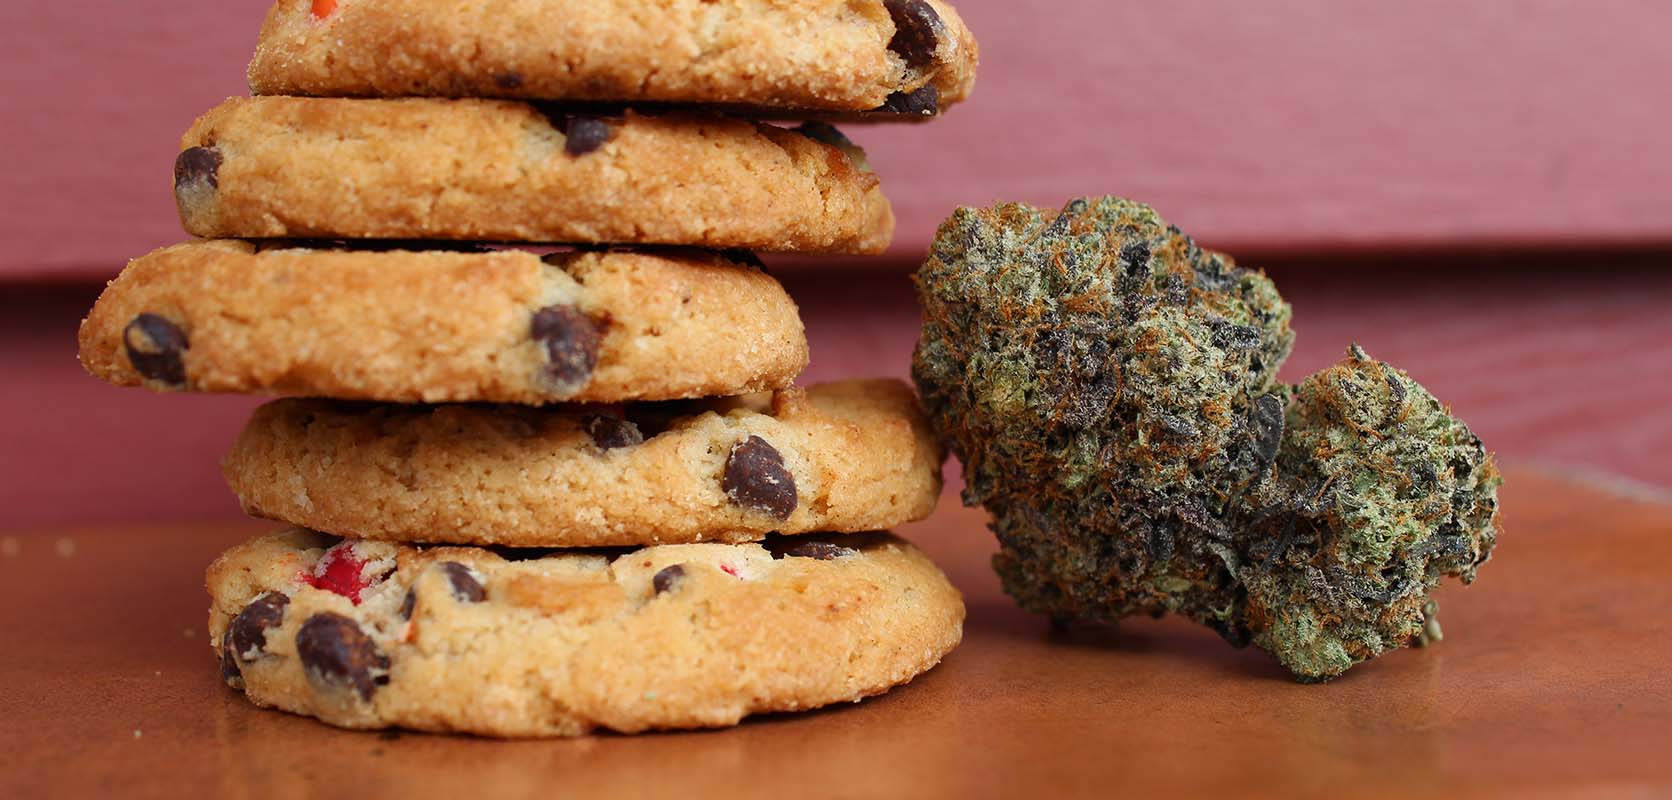 Weed chocolate chip cookies next to a budget bud of weed from Low Price Bud online dispensary Canada for mail order marijuana, edibles, shatter, and weed online Canada.